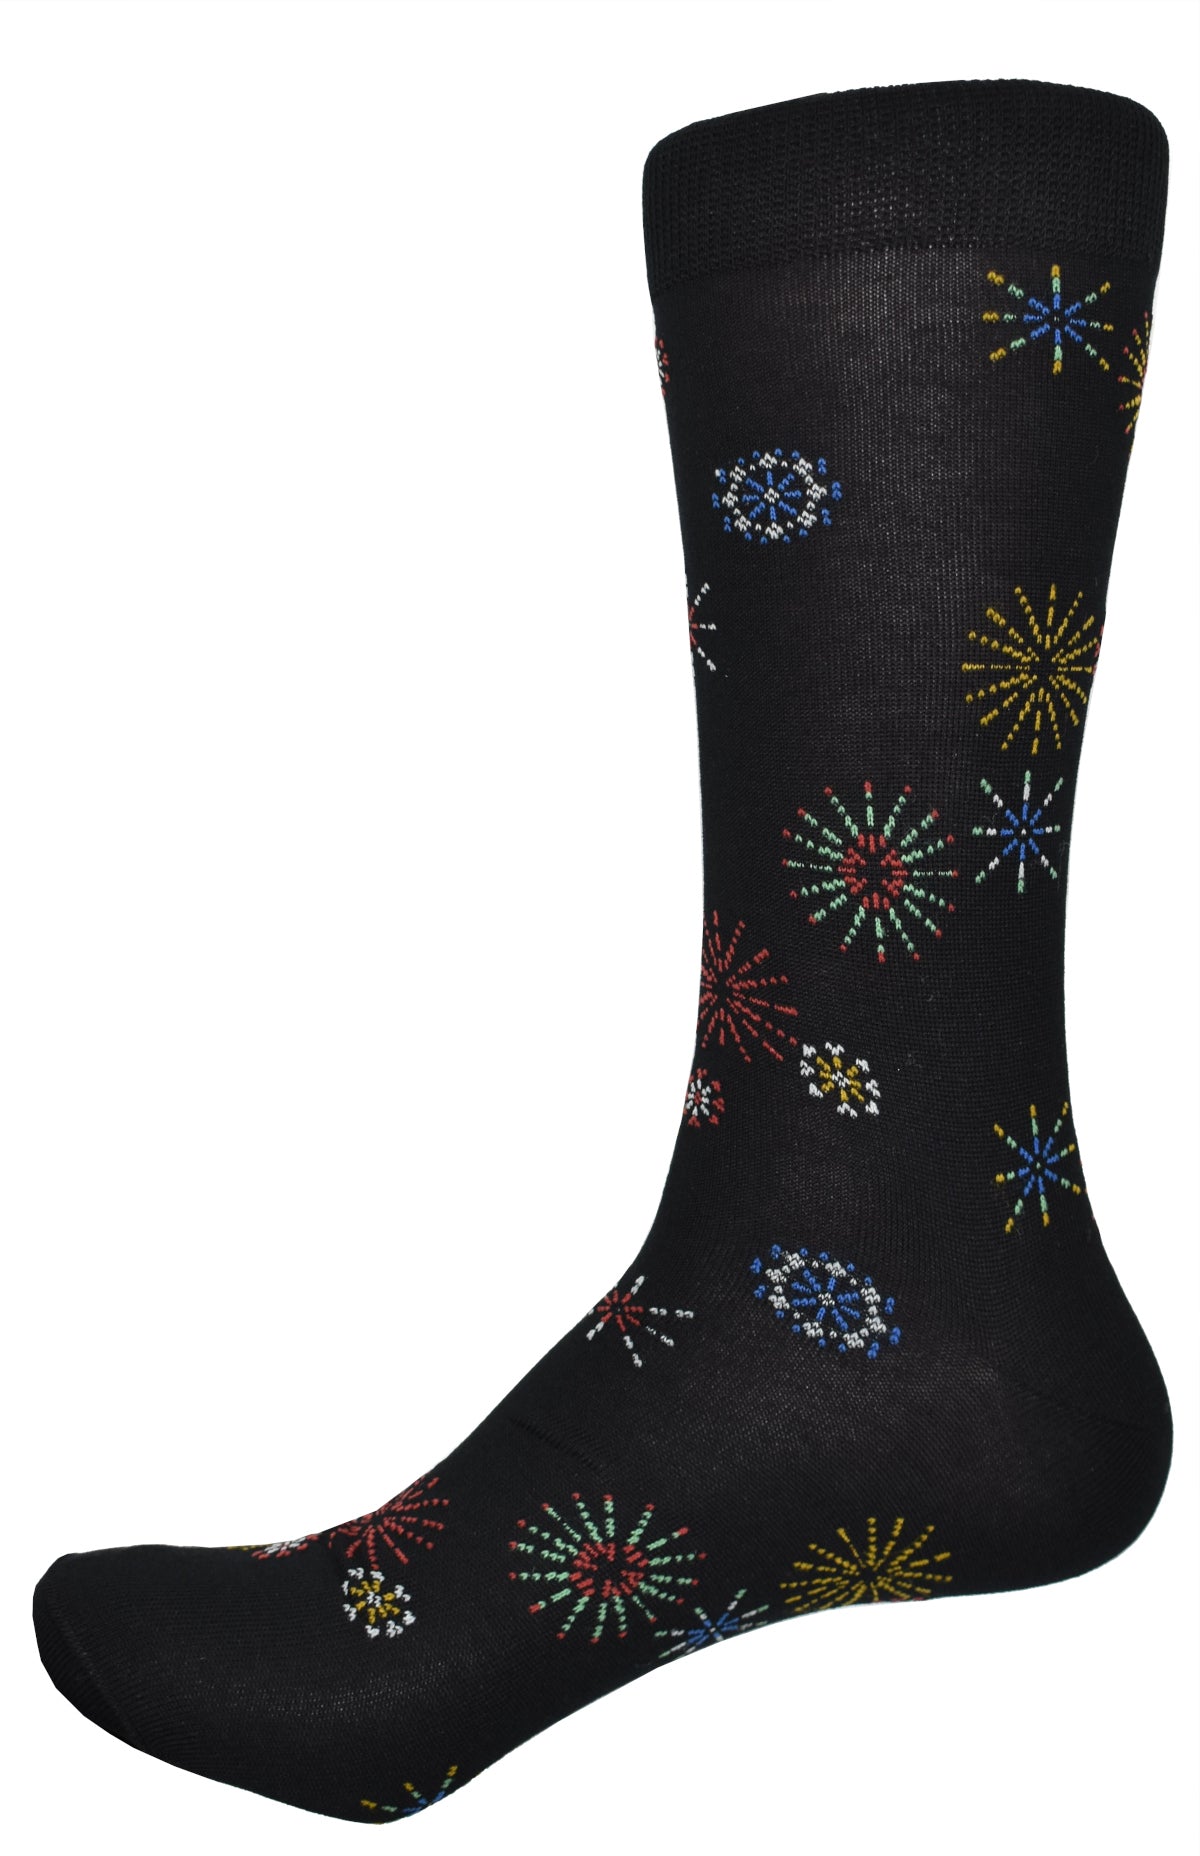 Celebrate style and comfort with ZV1579 Fireworks socks. They feature soft mercerized cotton and lycra for a snug fit that moves with you. The black fabric features multicolor, firework-style images for a unique, eye-catching look.   One size fits 9-12. by Marcello Sport